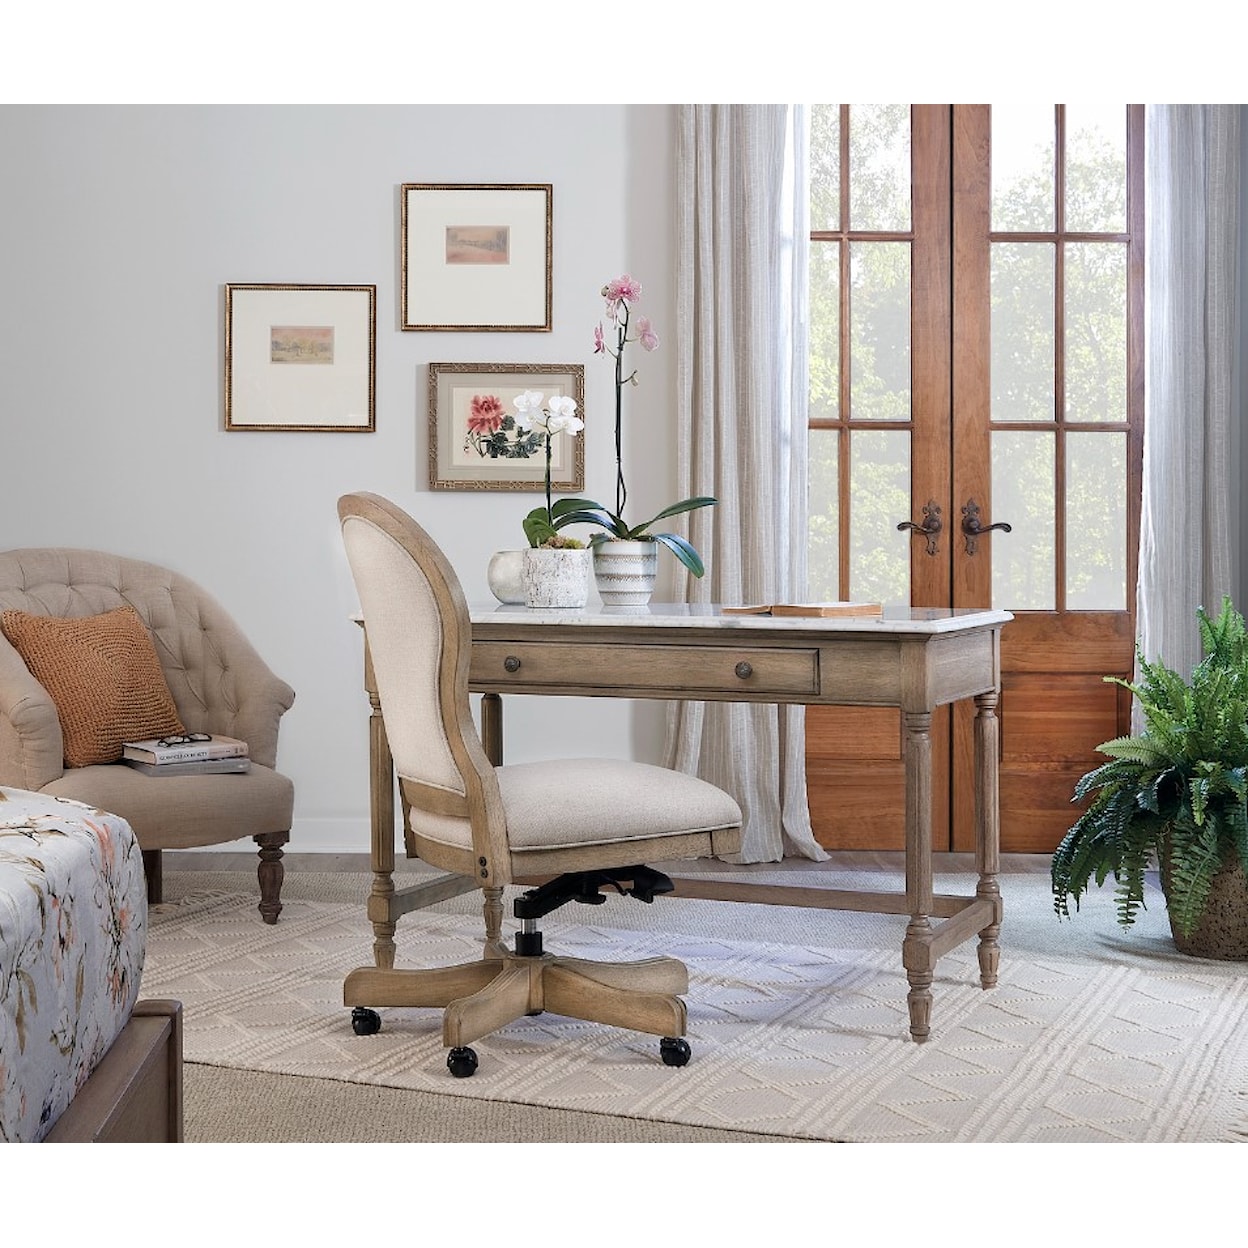 Aspenhome   Writing Desk with Marble Top